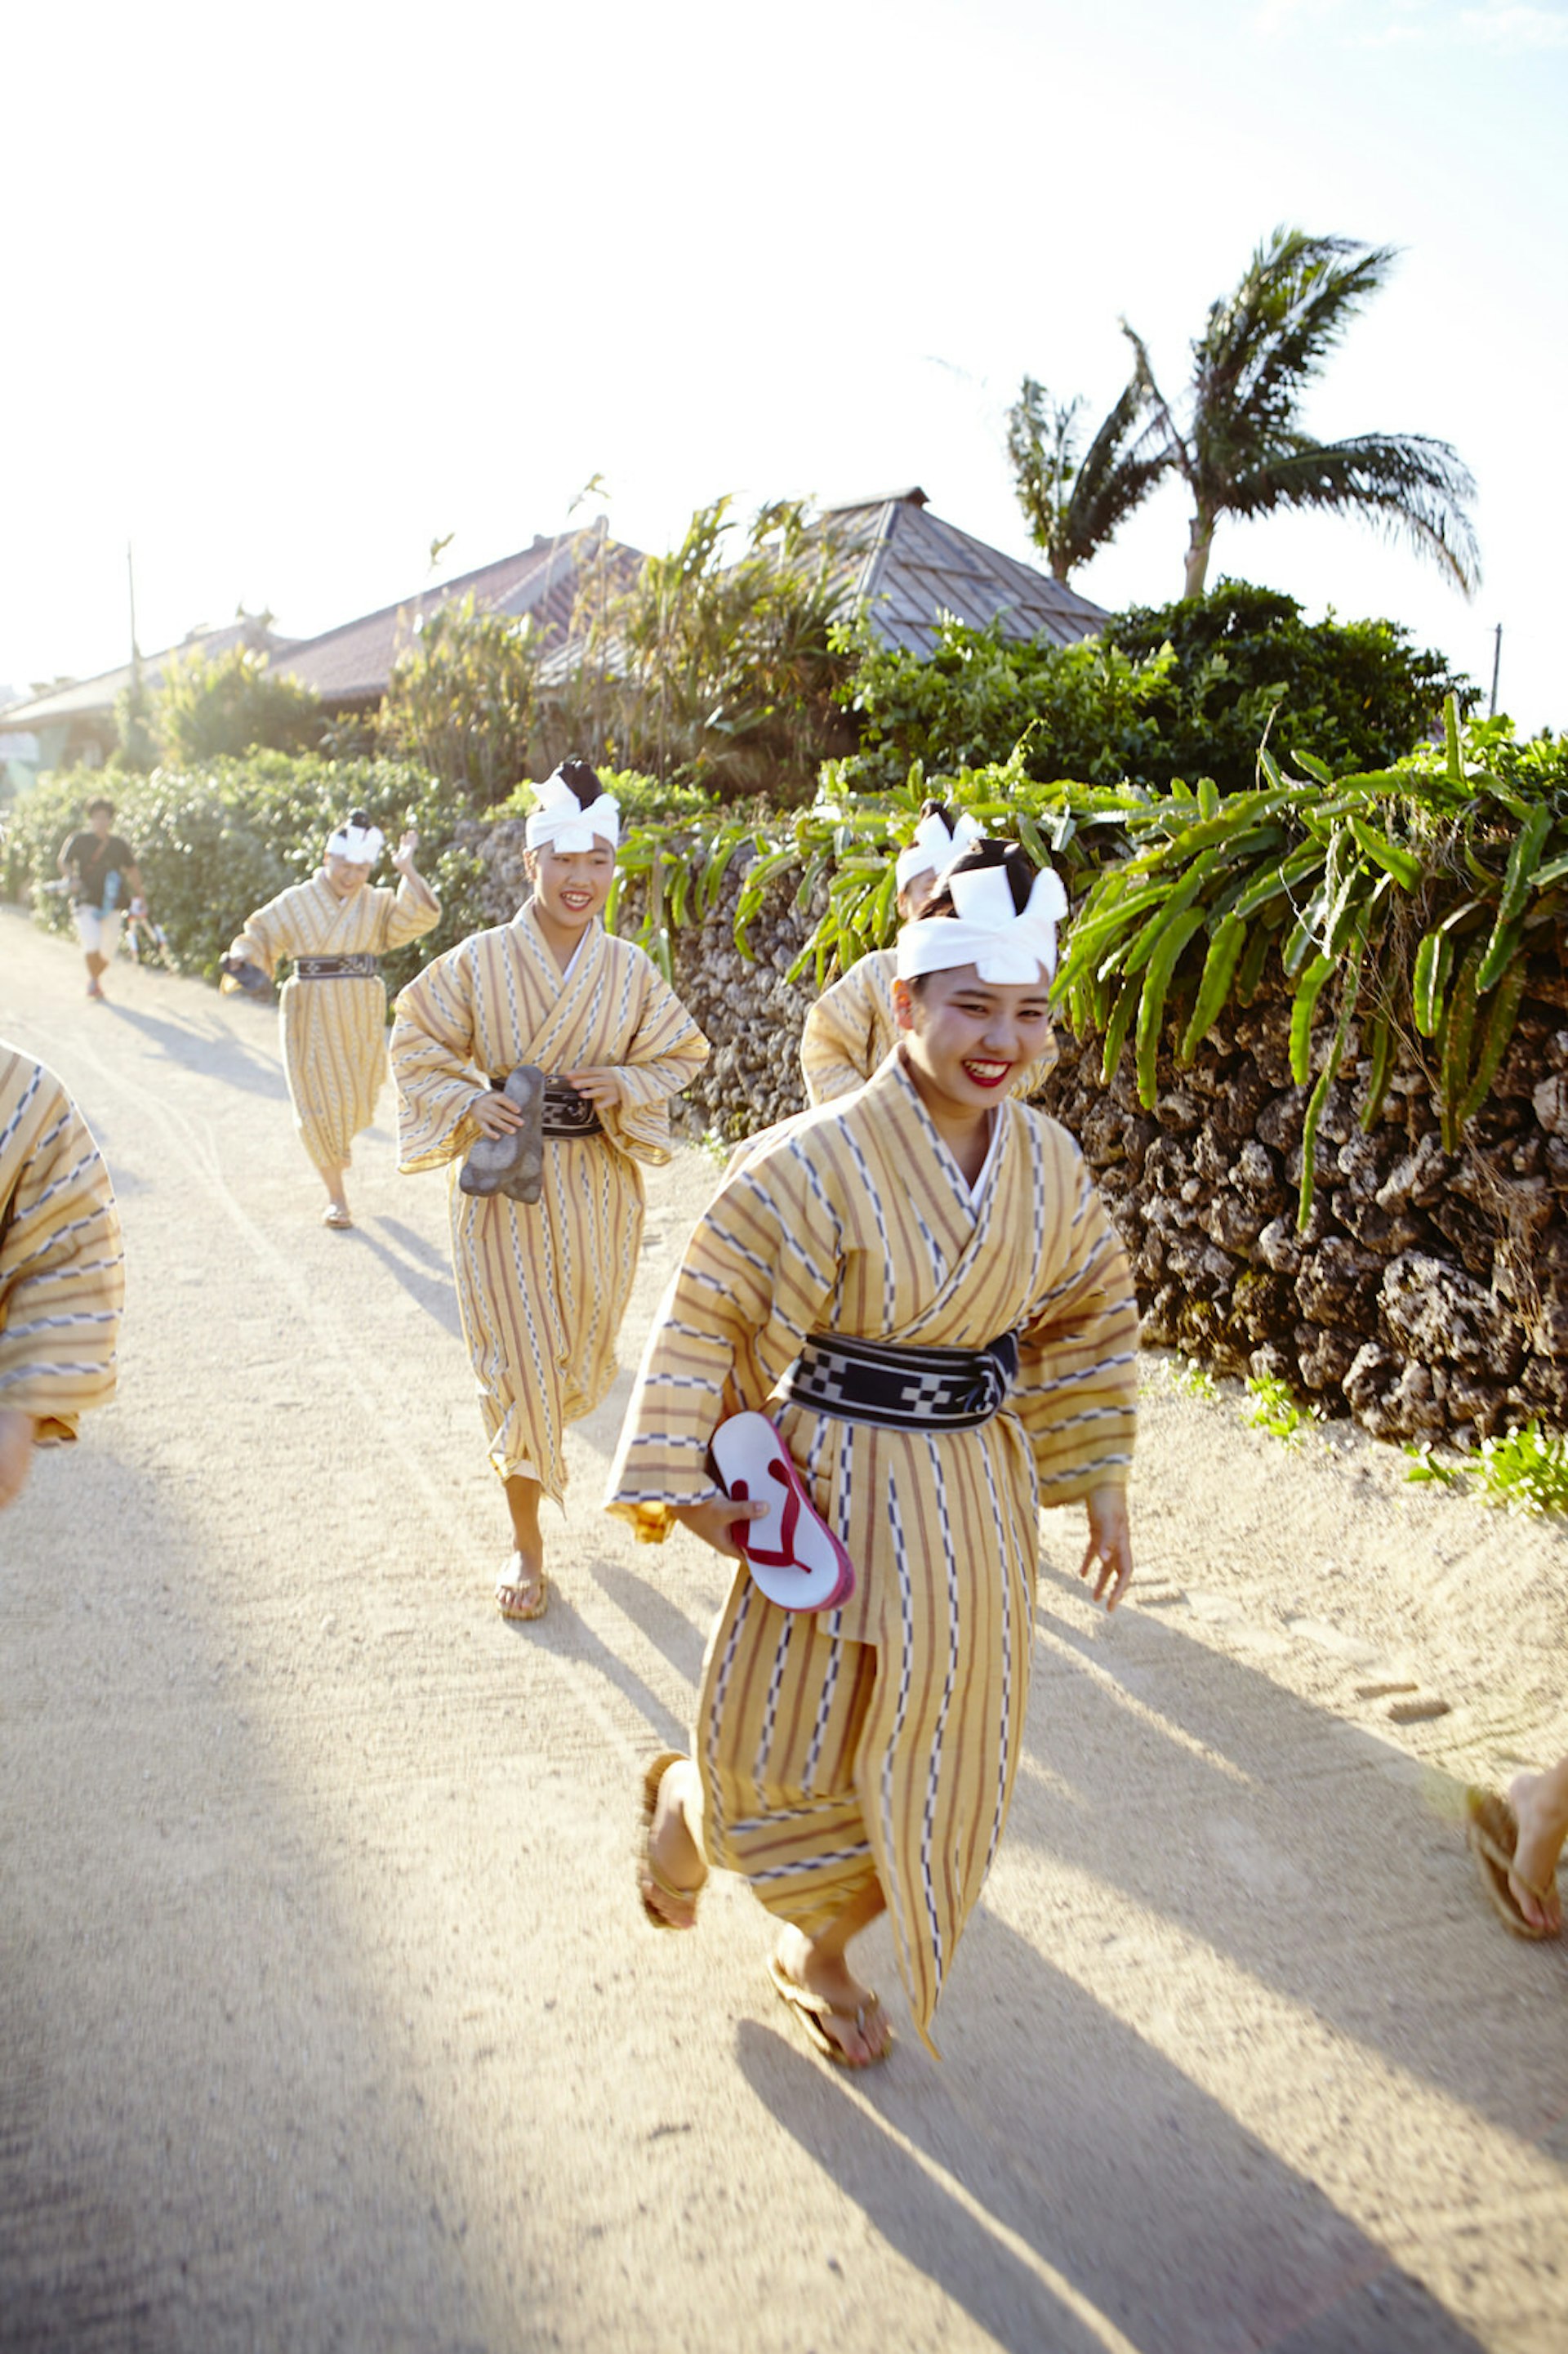 Villagers walk through the streets of Taketomi, on their way to perform in Tanadui festivities © Matt Munro / Lonely Planet